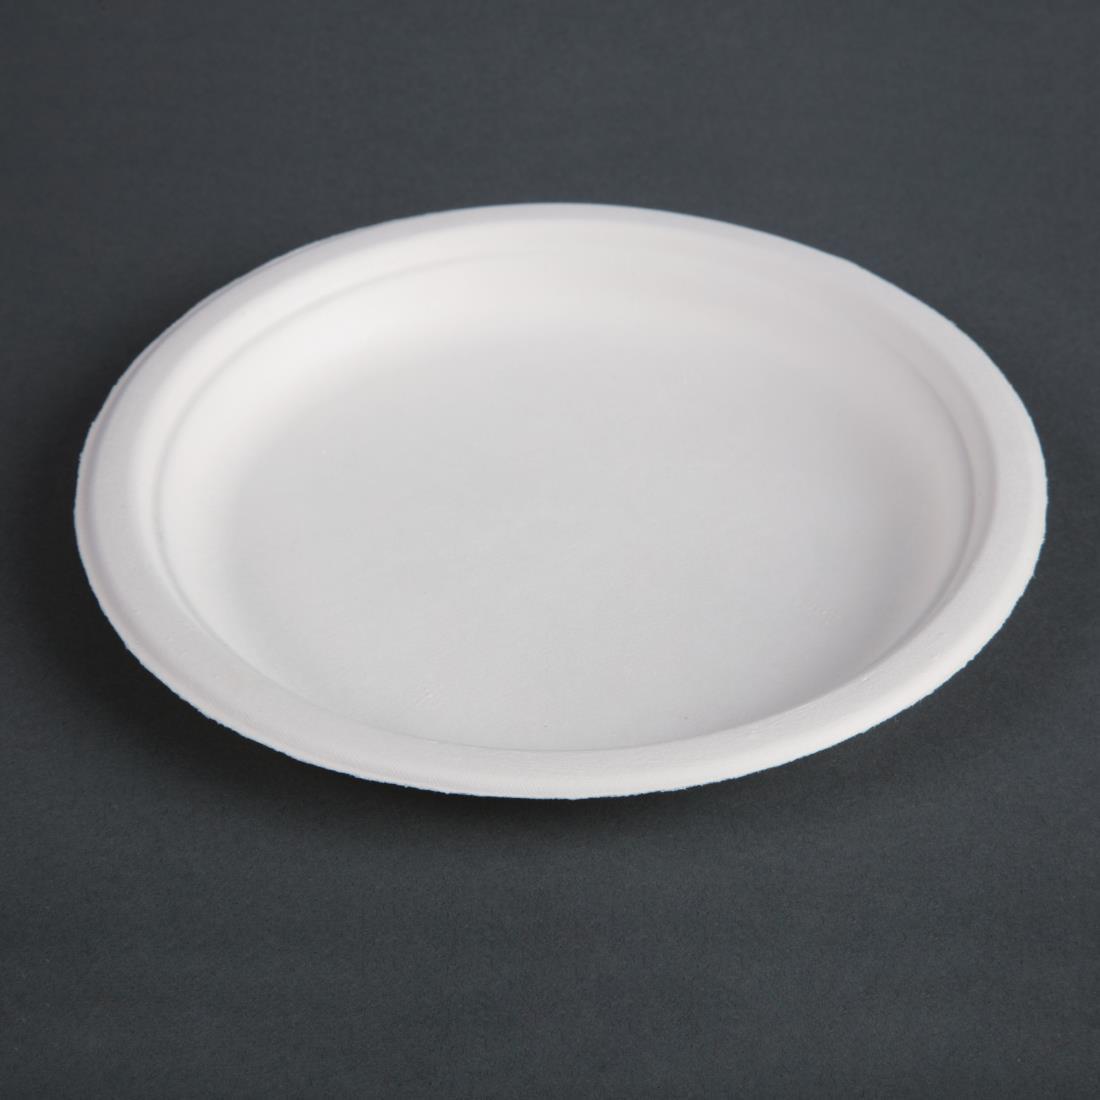 Fiesta Compostable Bagasse Plates Round 179mm (Pack of 50) - CW905  - 3